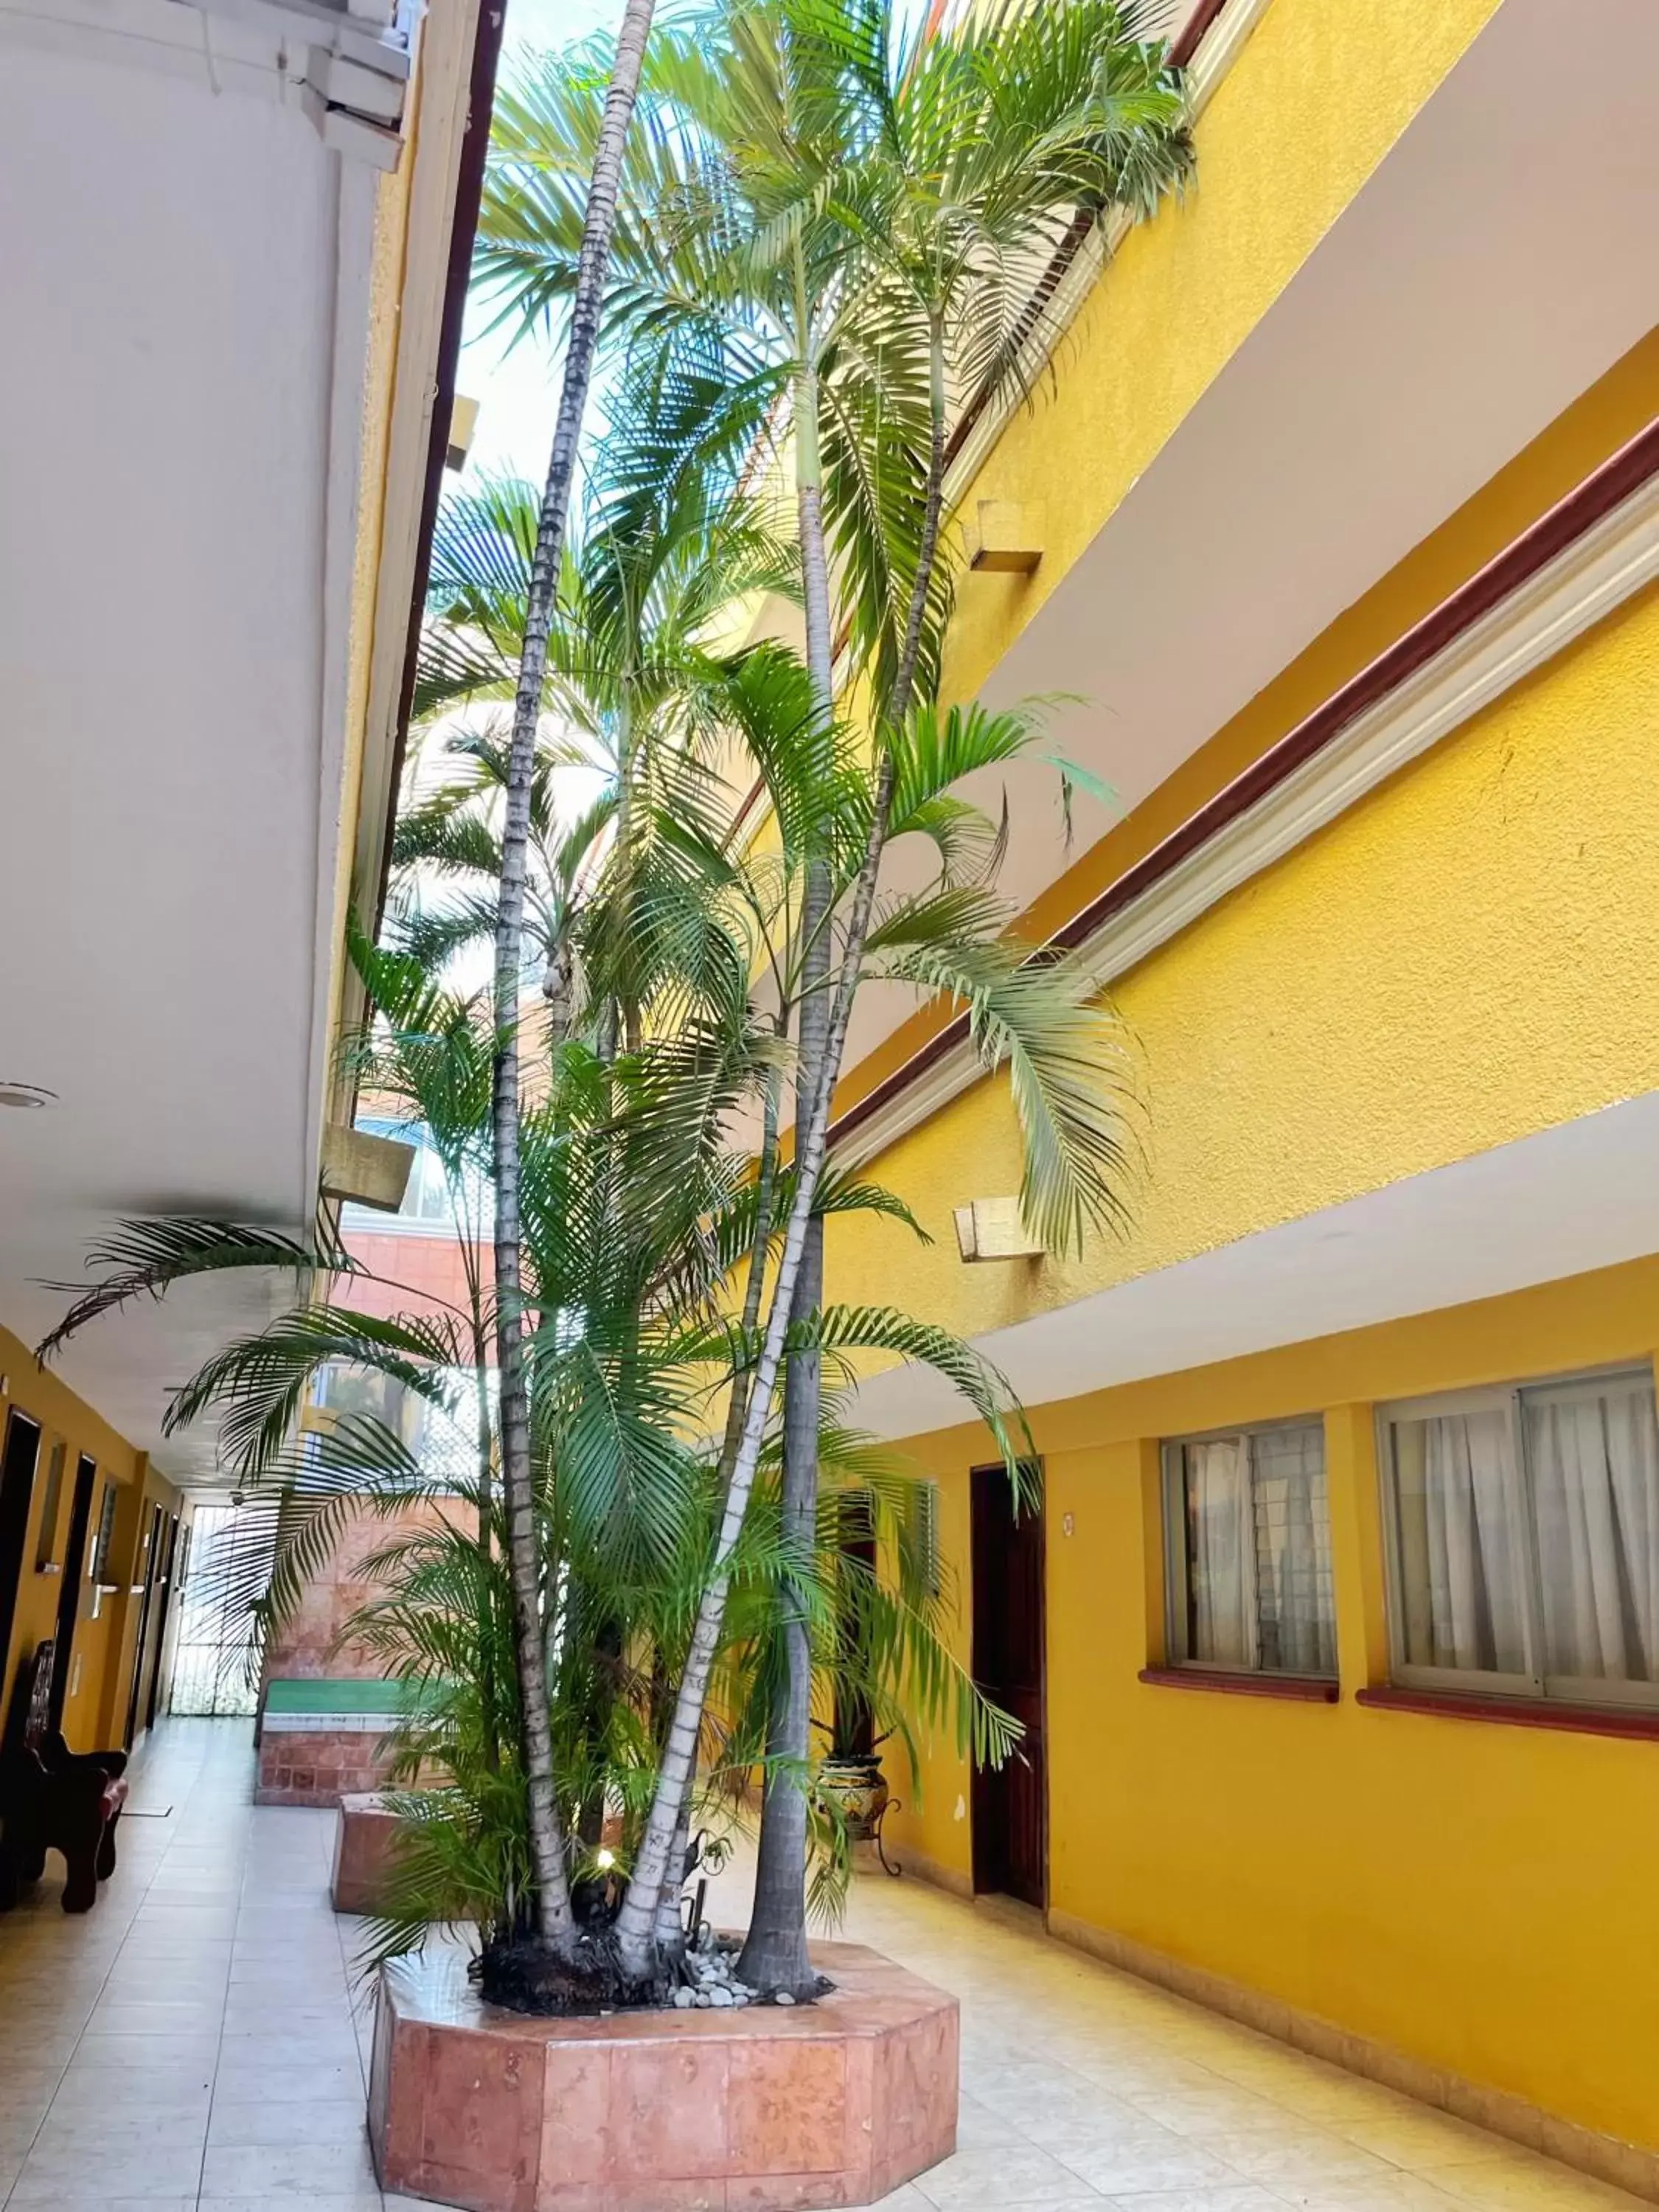 Property building in Suites Cancun Center